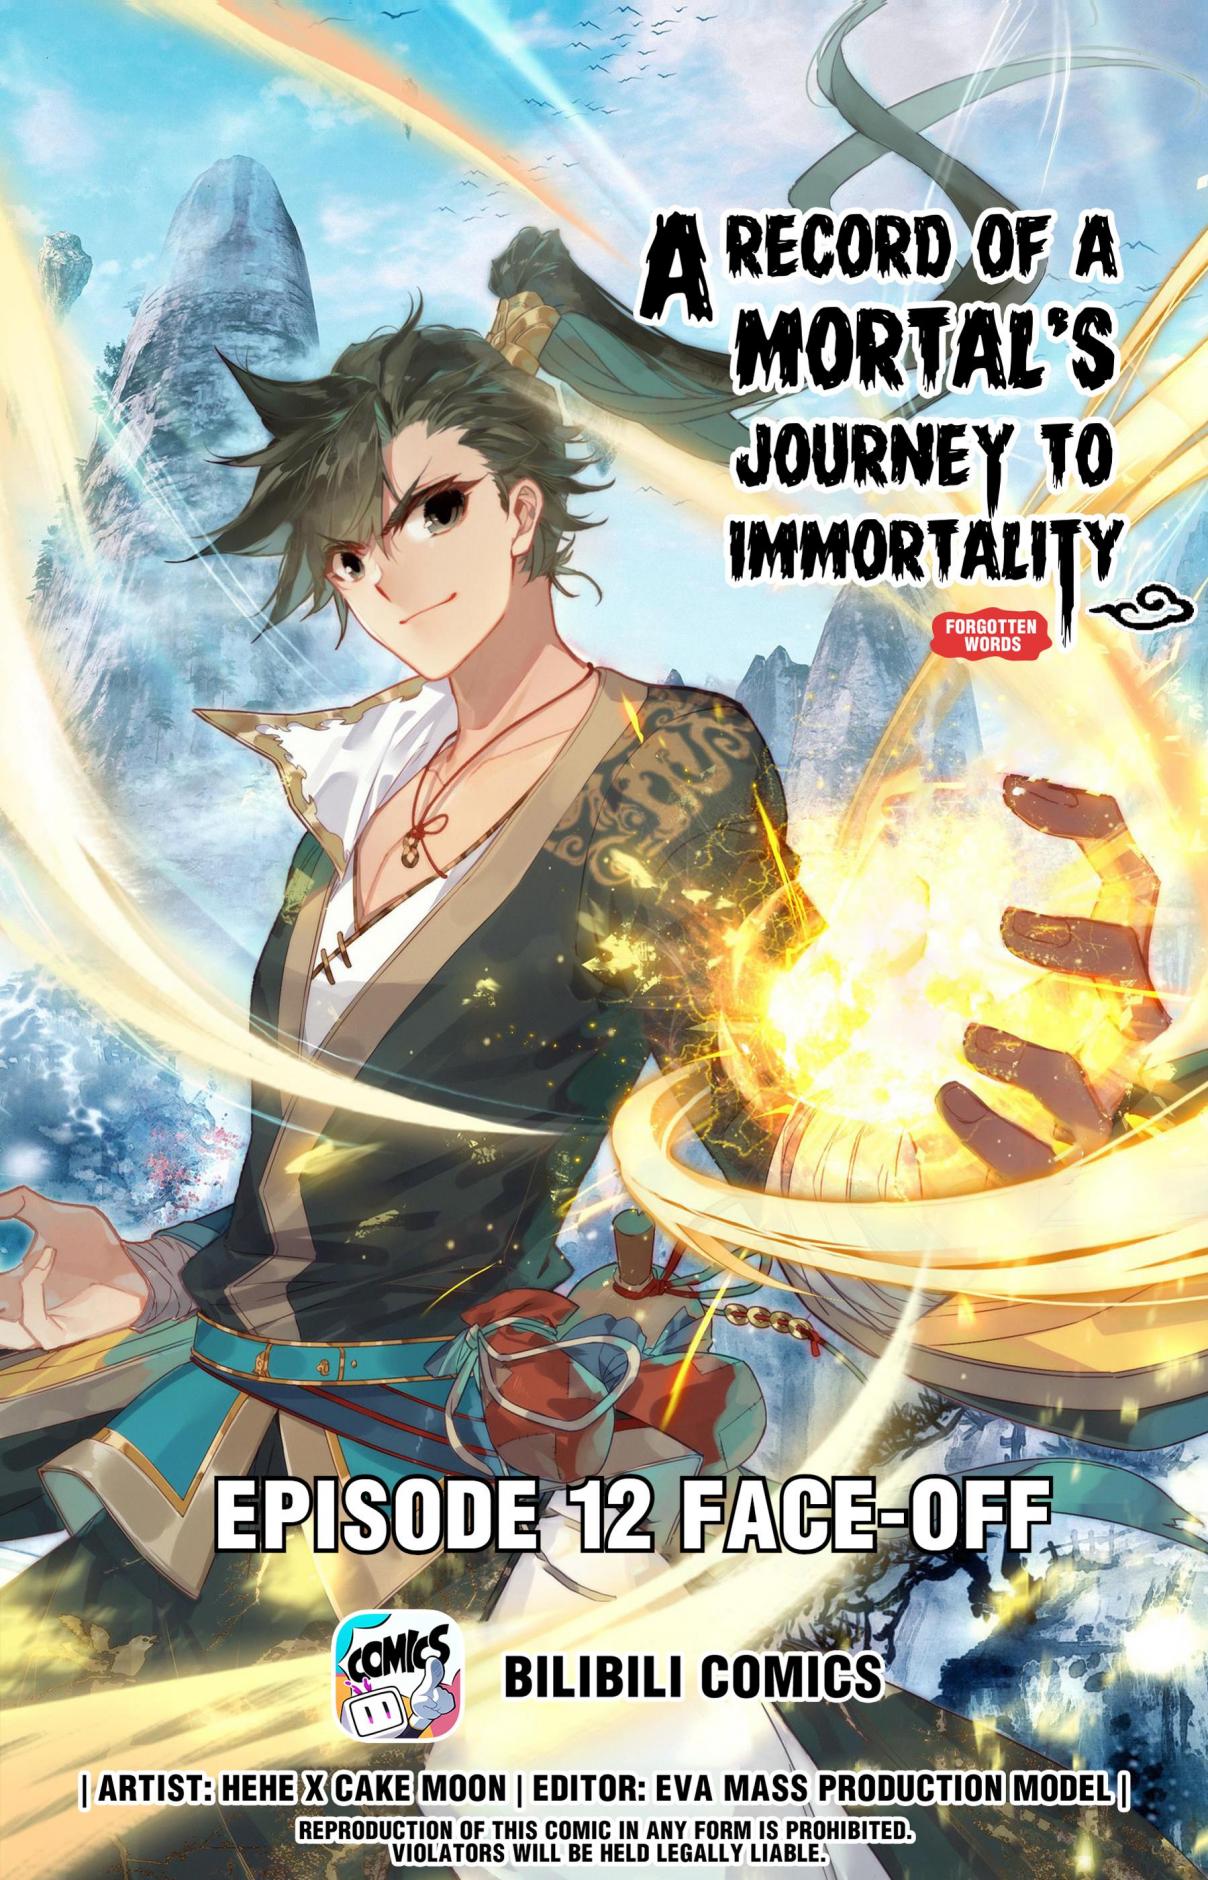 A Record of a Mortal's Journey to Immortality 12.0 Face-Off